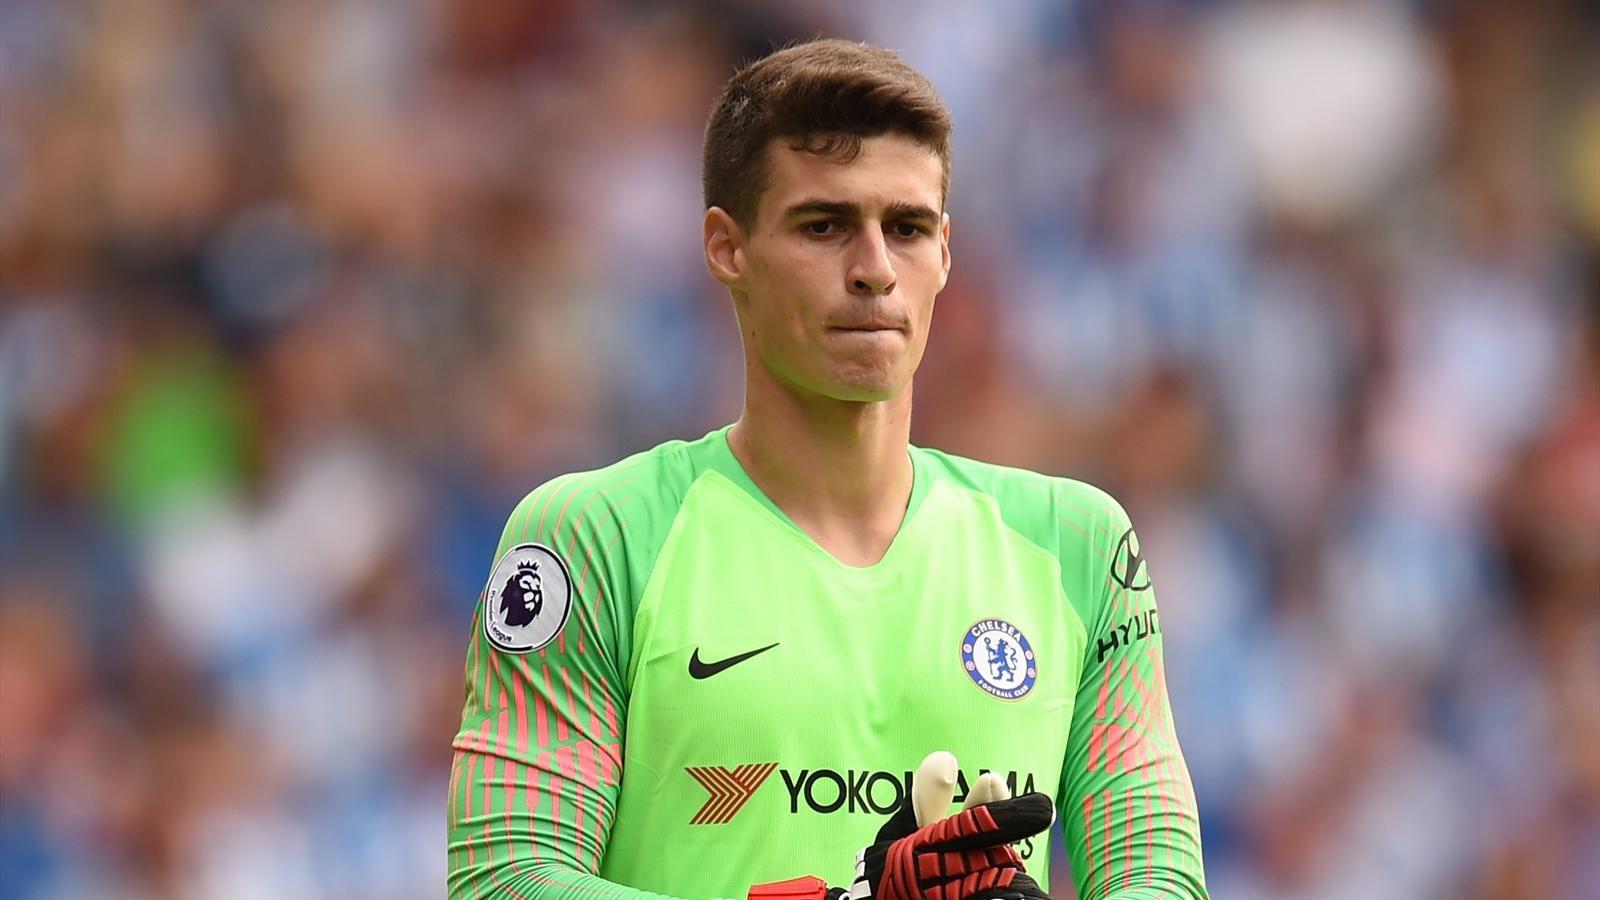 Debut watch: A solid start for Kepa Arrizabalaga against toothless